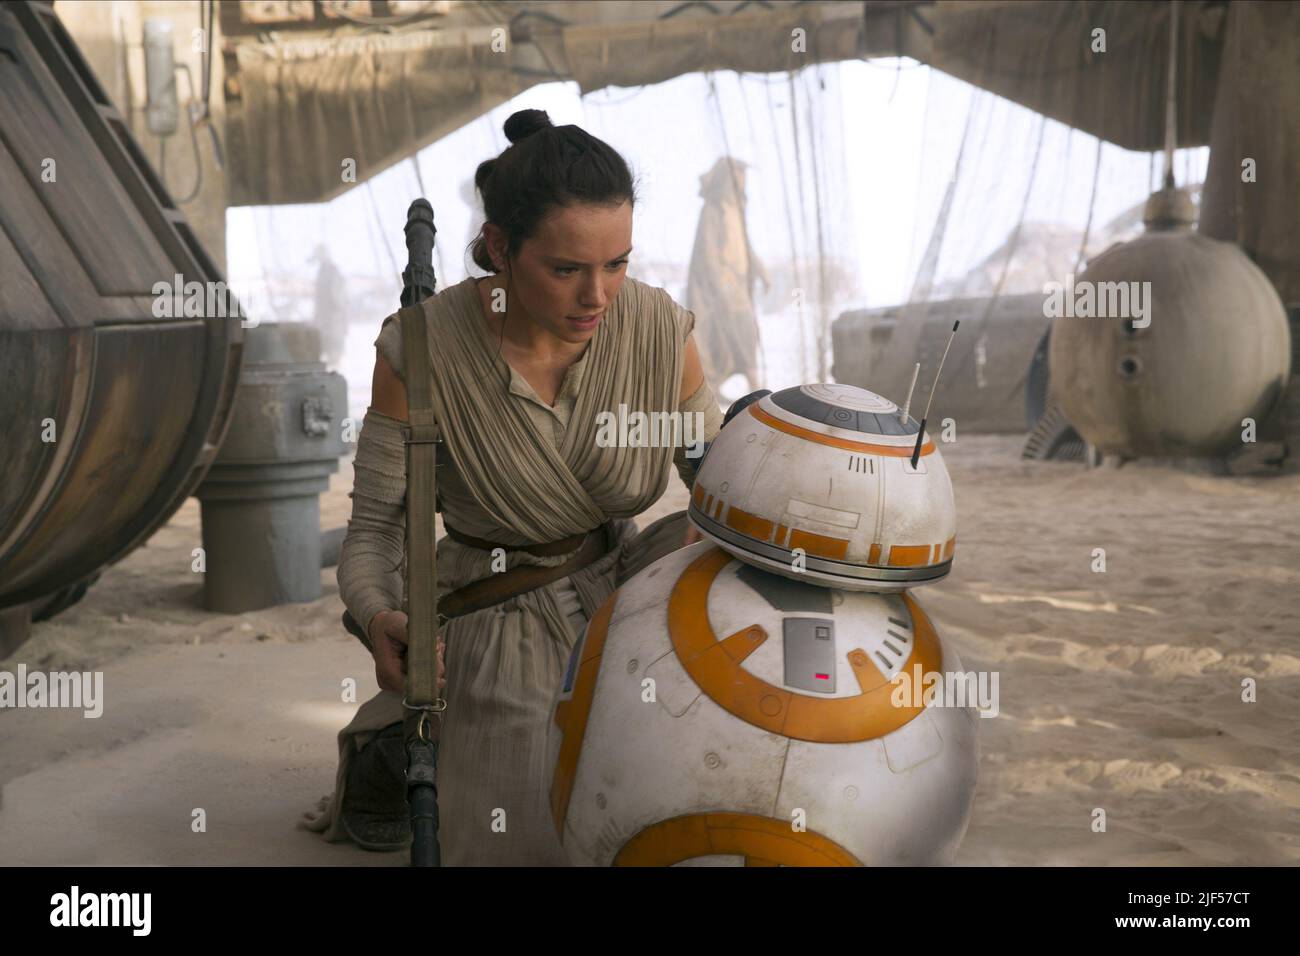 RIDLEY,DROID, STAR WARS: EPISODE VII - THE FORCE AWAKENS, 2015 Stock Photo